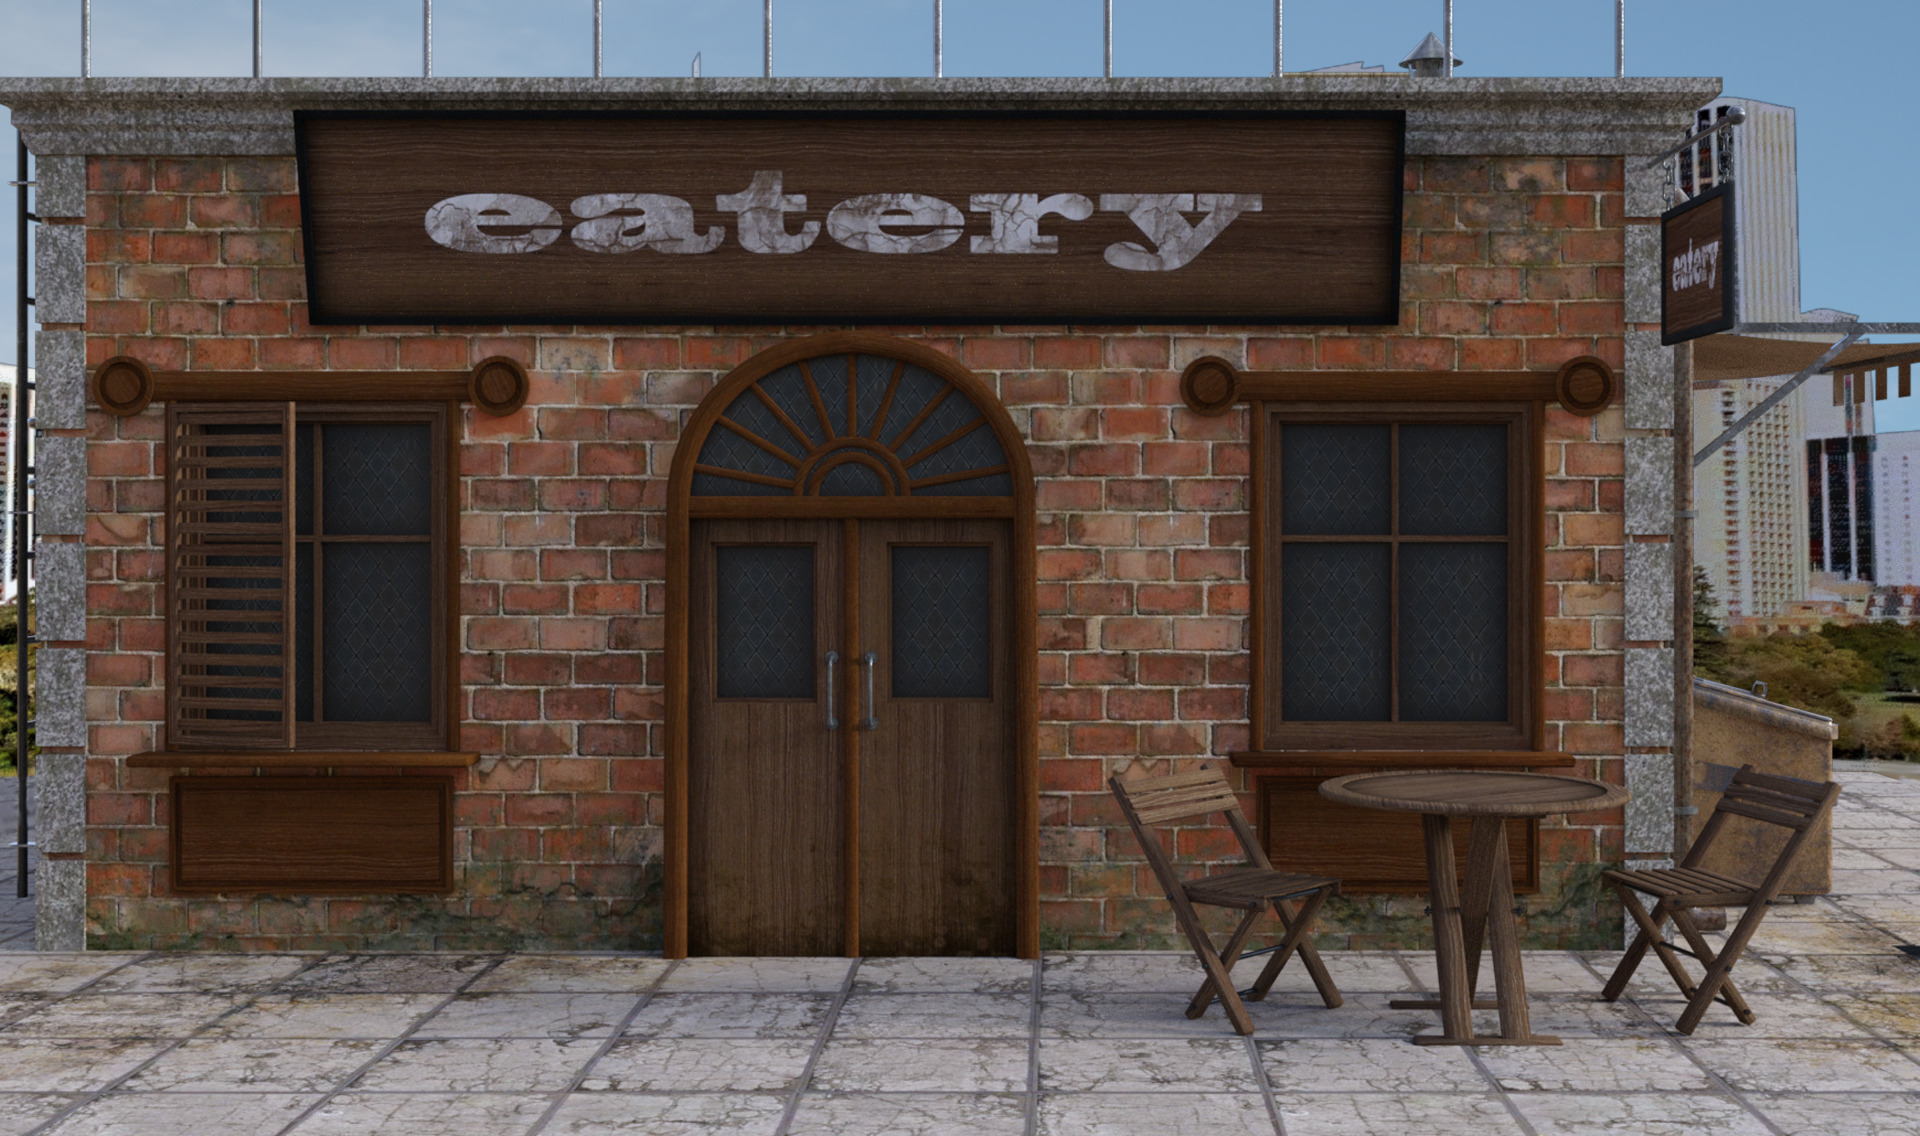 EXT. EATERY – DAY